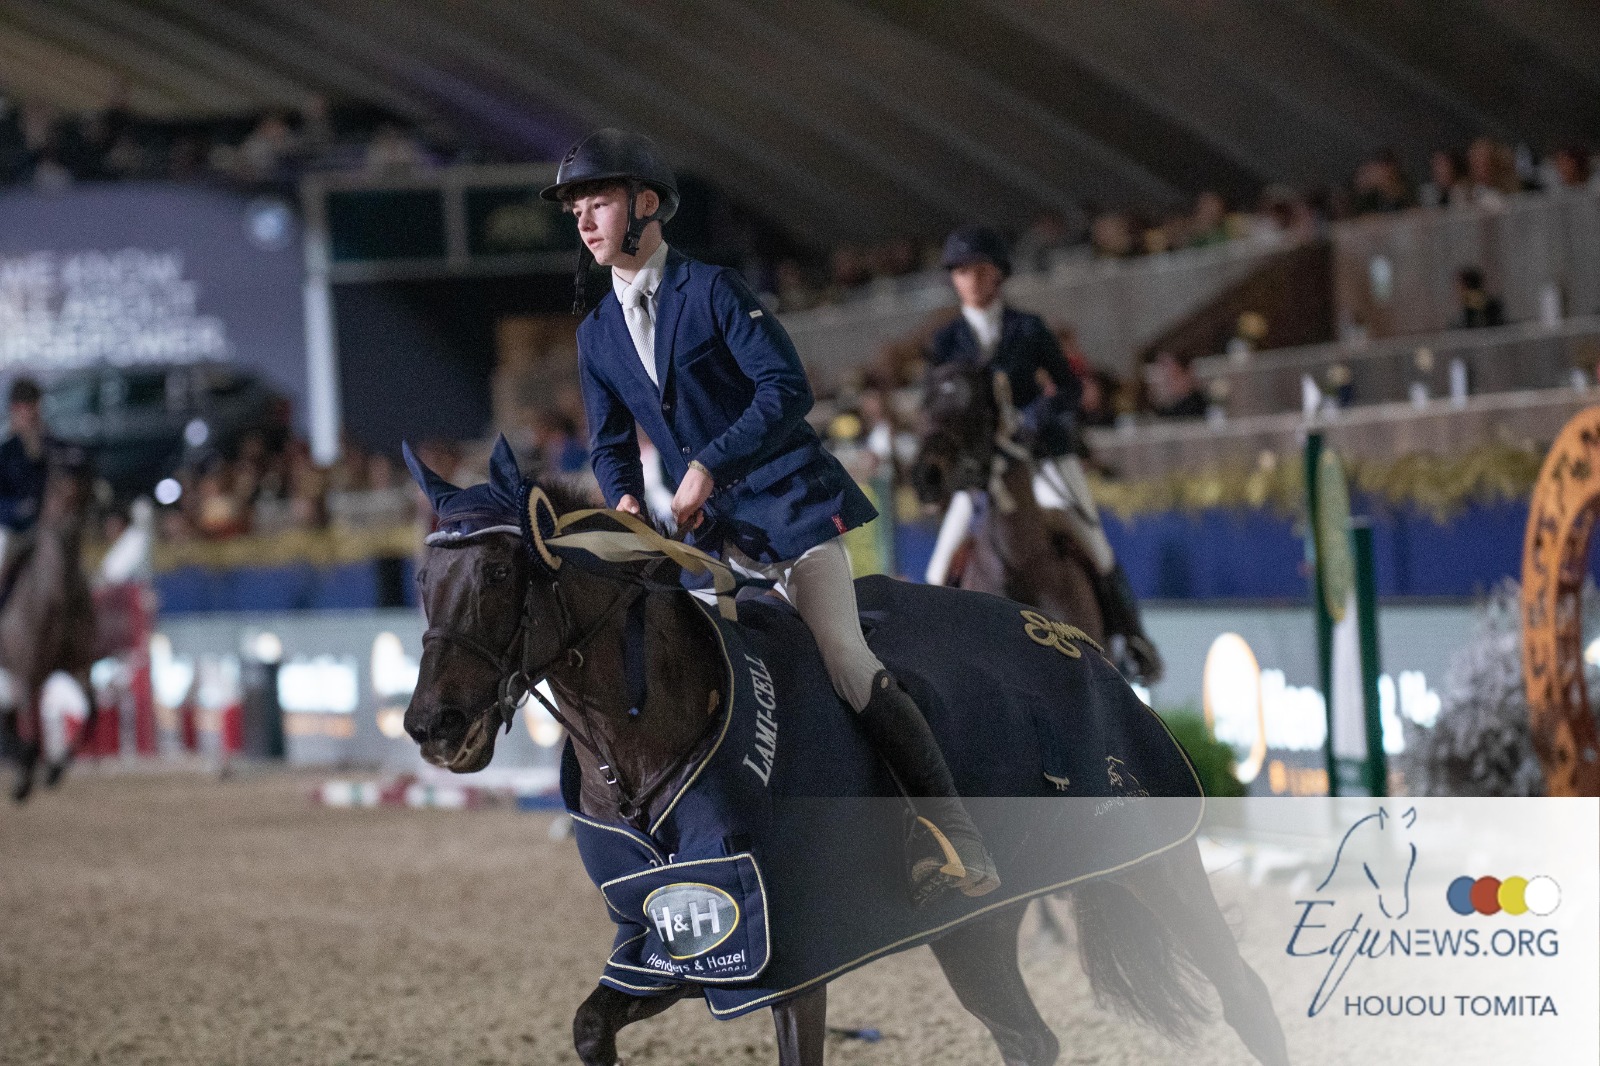 Ben Walsh wins FEI Ponies' Trophy Grand Prix: "I was trying all year, but it payed off today"